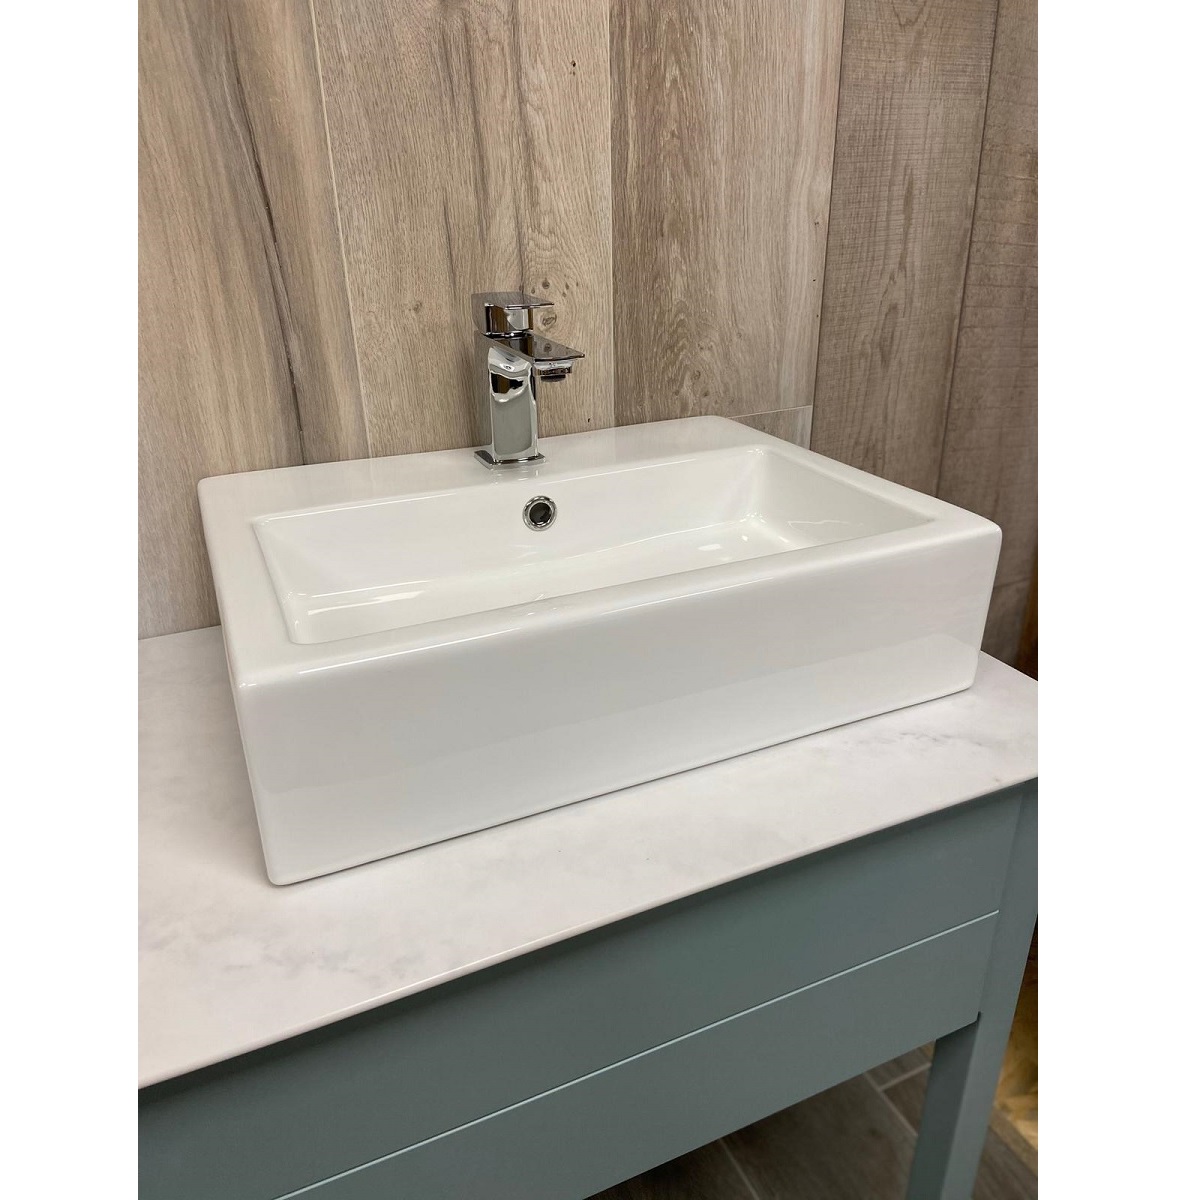 Objekt Ceramica Constance 510mm Counter Top Basin with Tap Hole (11223)